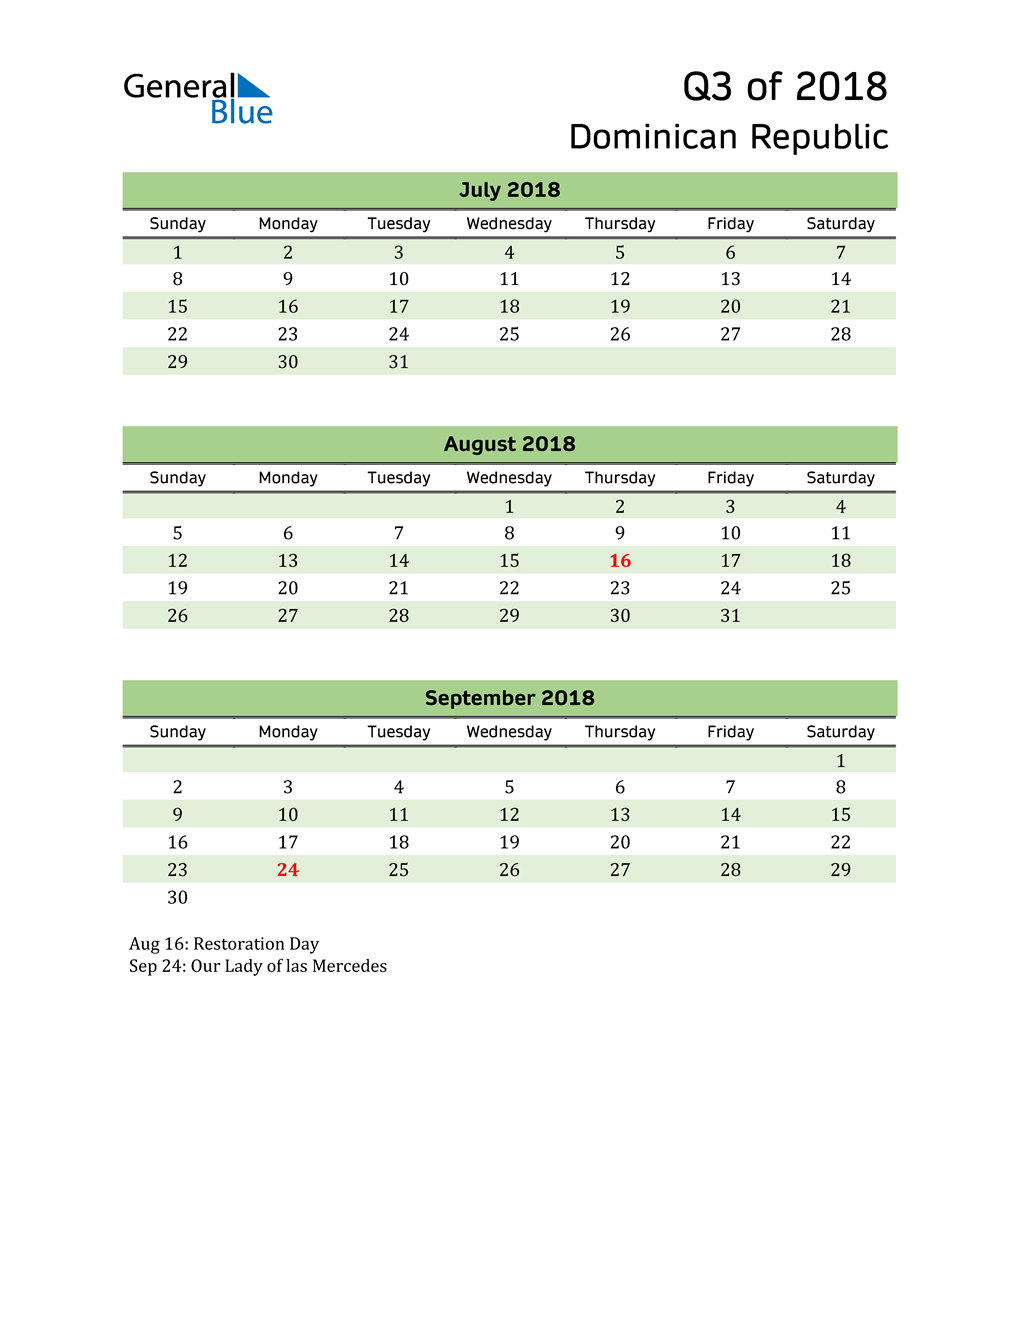  Quarterly Calendar 2018 with Dominican Republic Holidays 